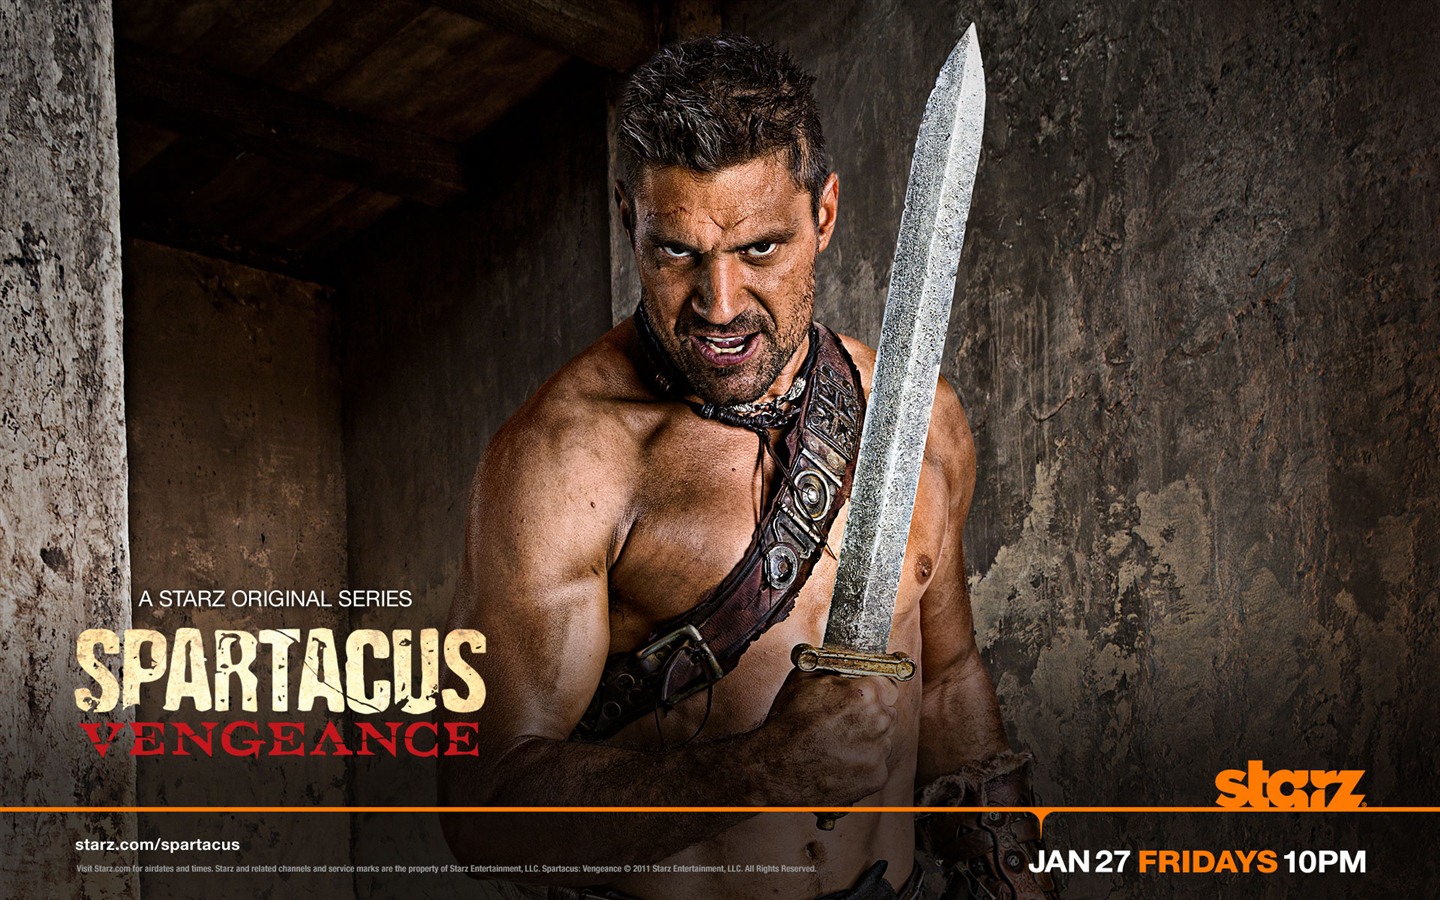 Spartacus: Vengeance HD wallpapers #11 - 1440x900